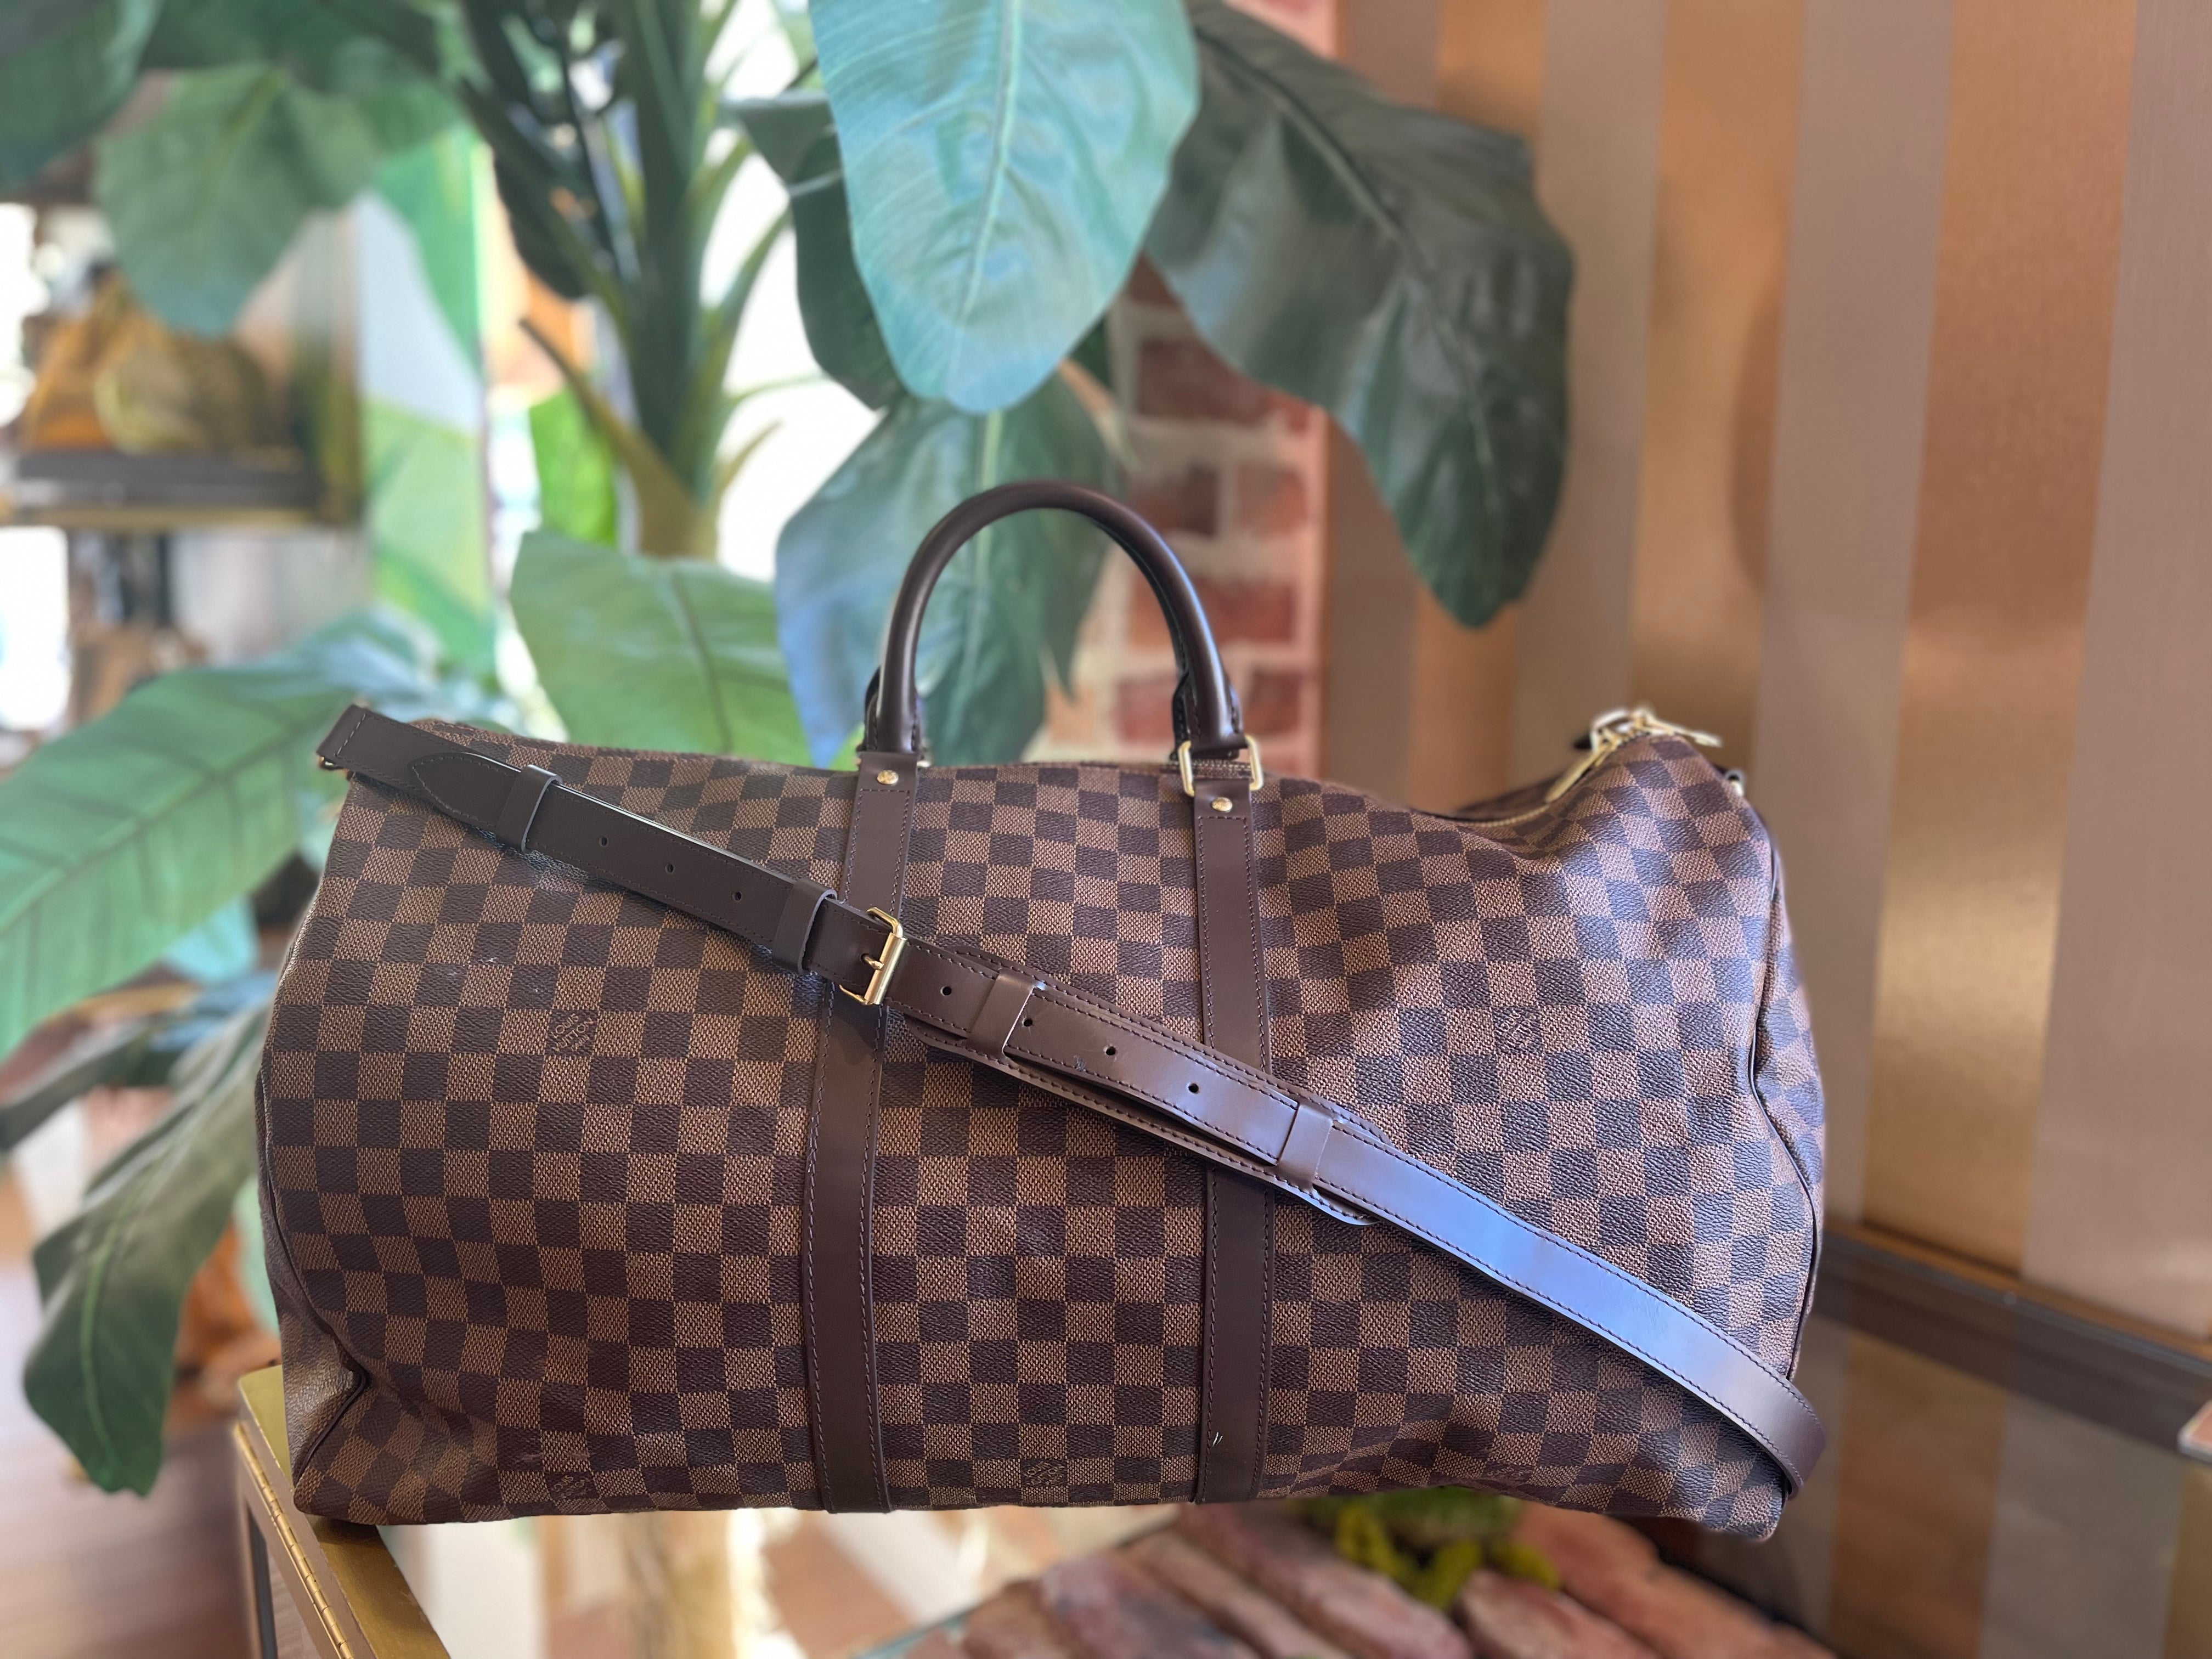 Louis Vuitton Keepall 50 Travel Bag in Ebene Damier Canvas and